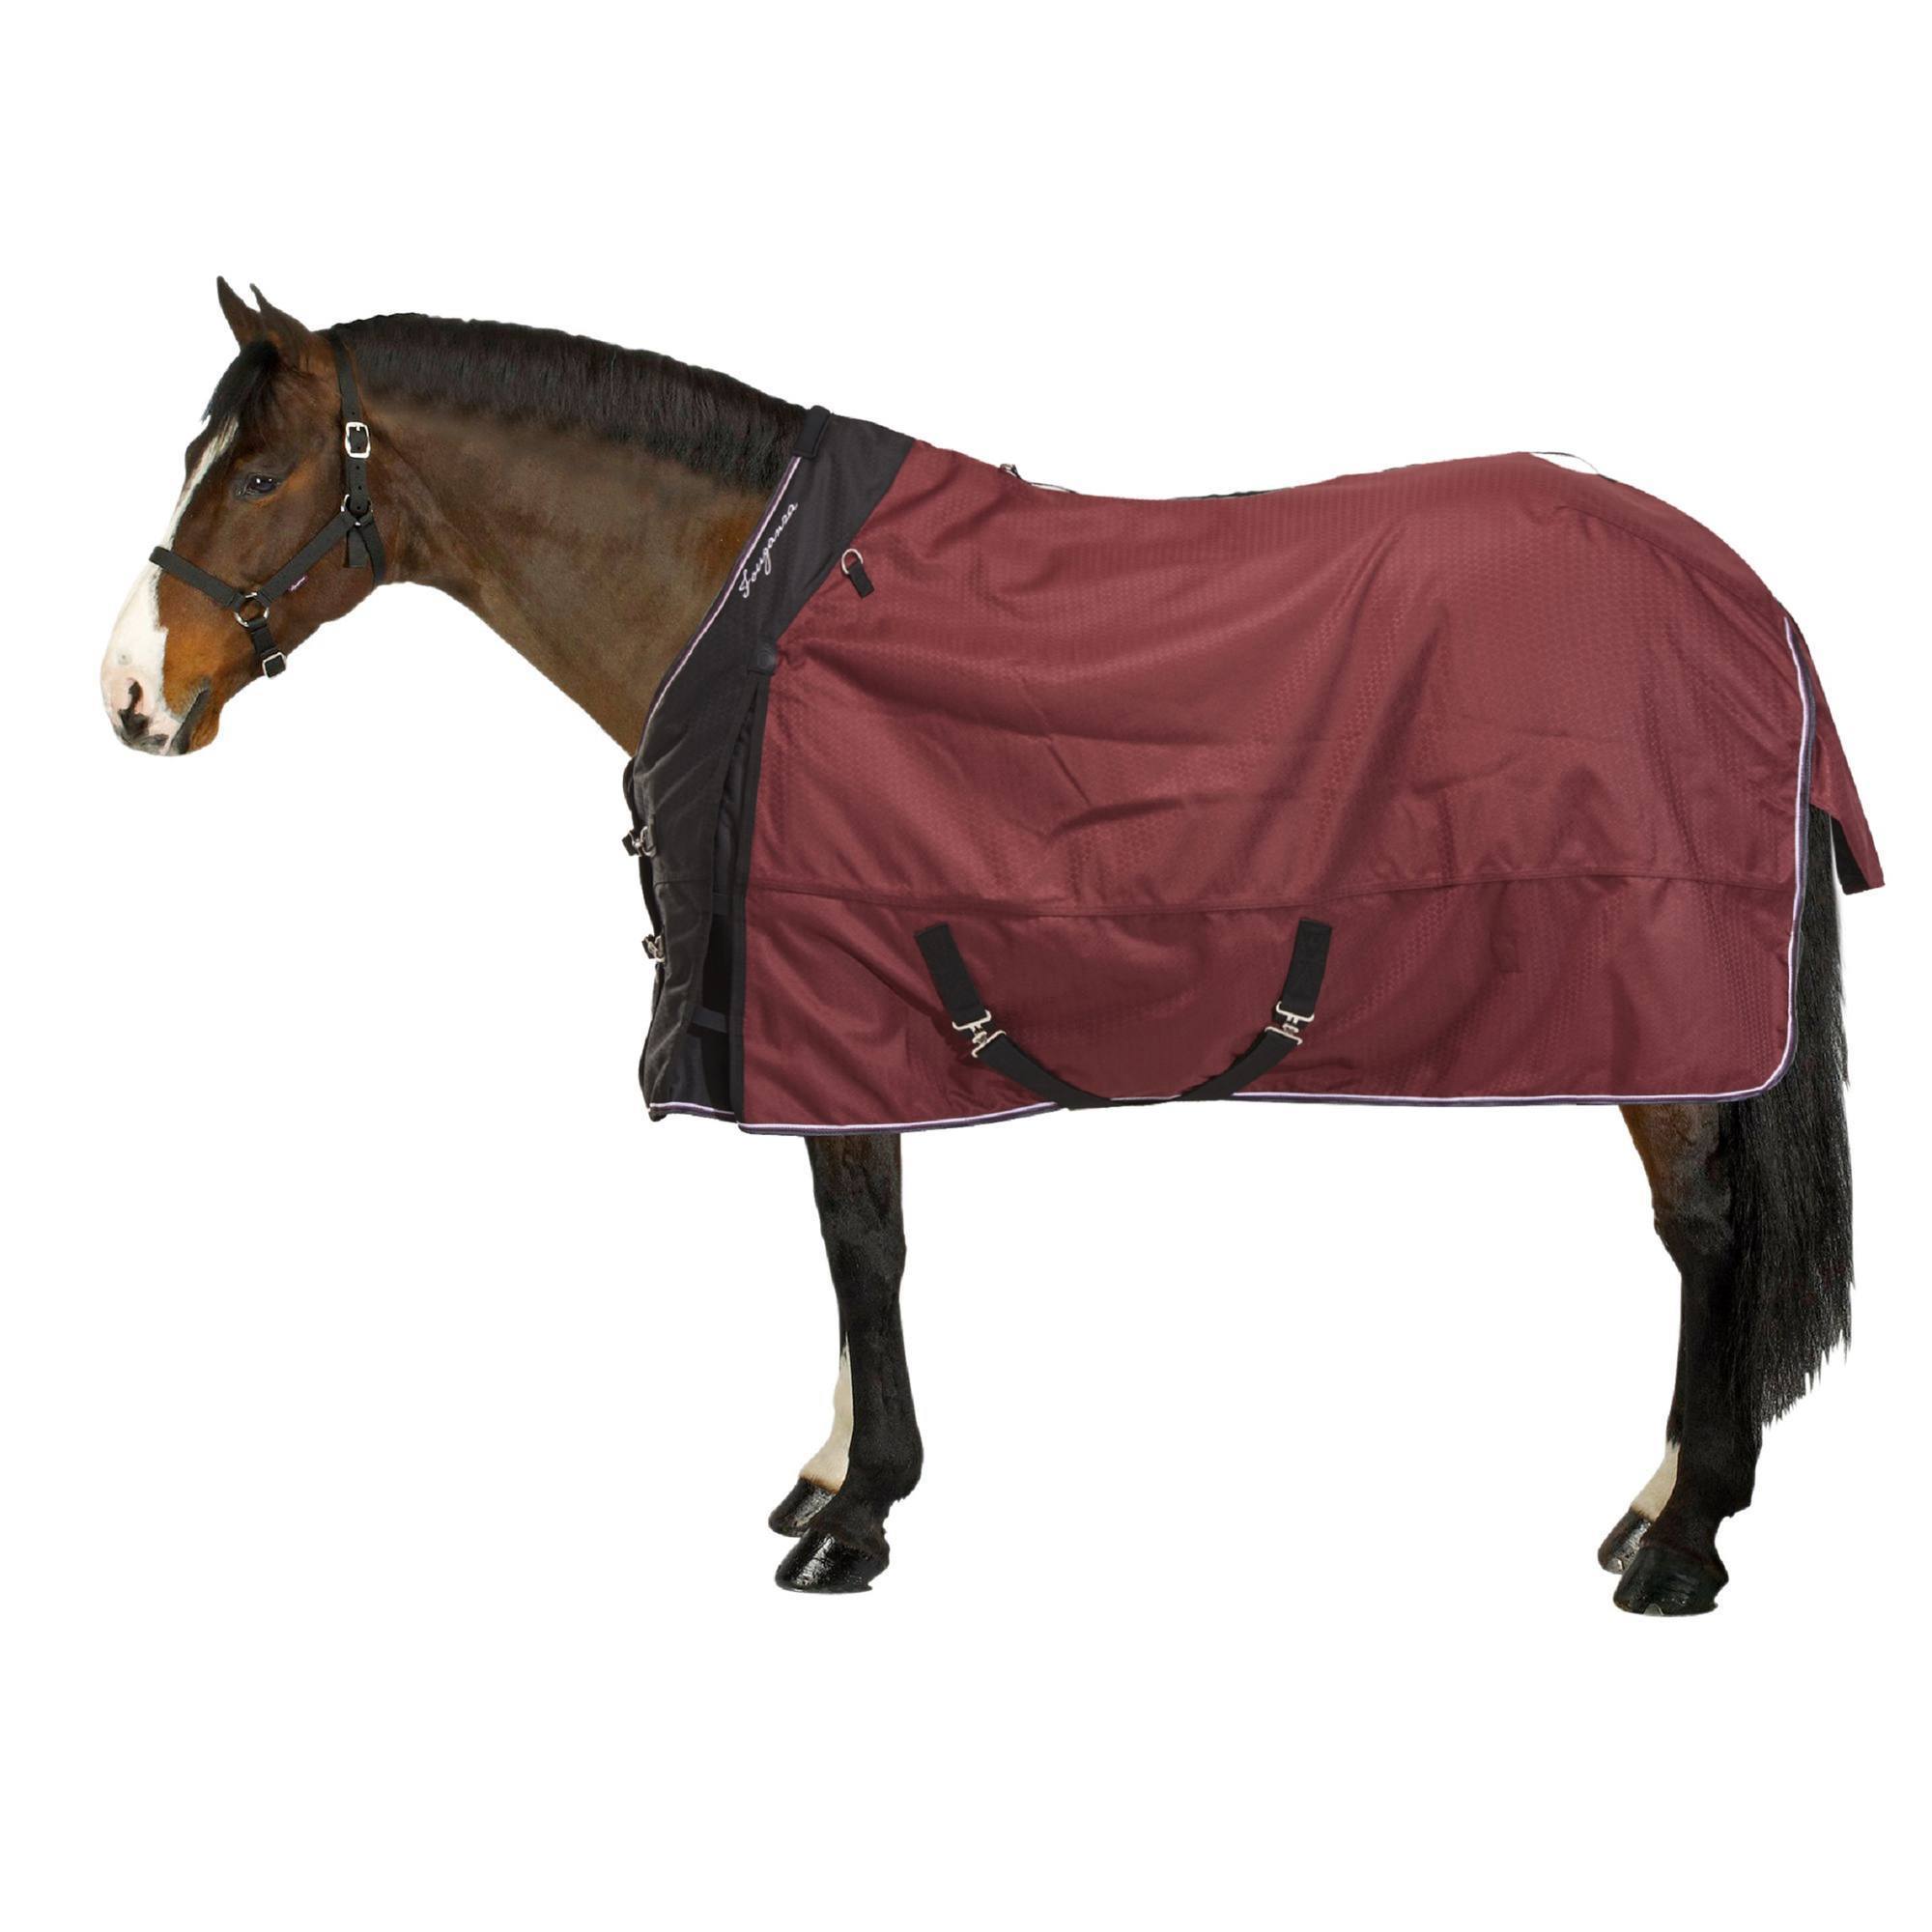 Allweather 300 1000D Horse Riding Waterproof Rug For Horse Or Pony ...